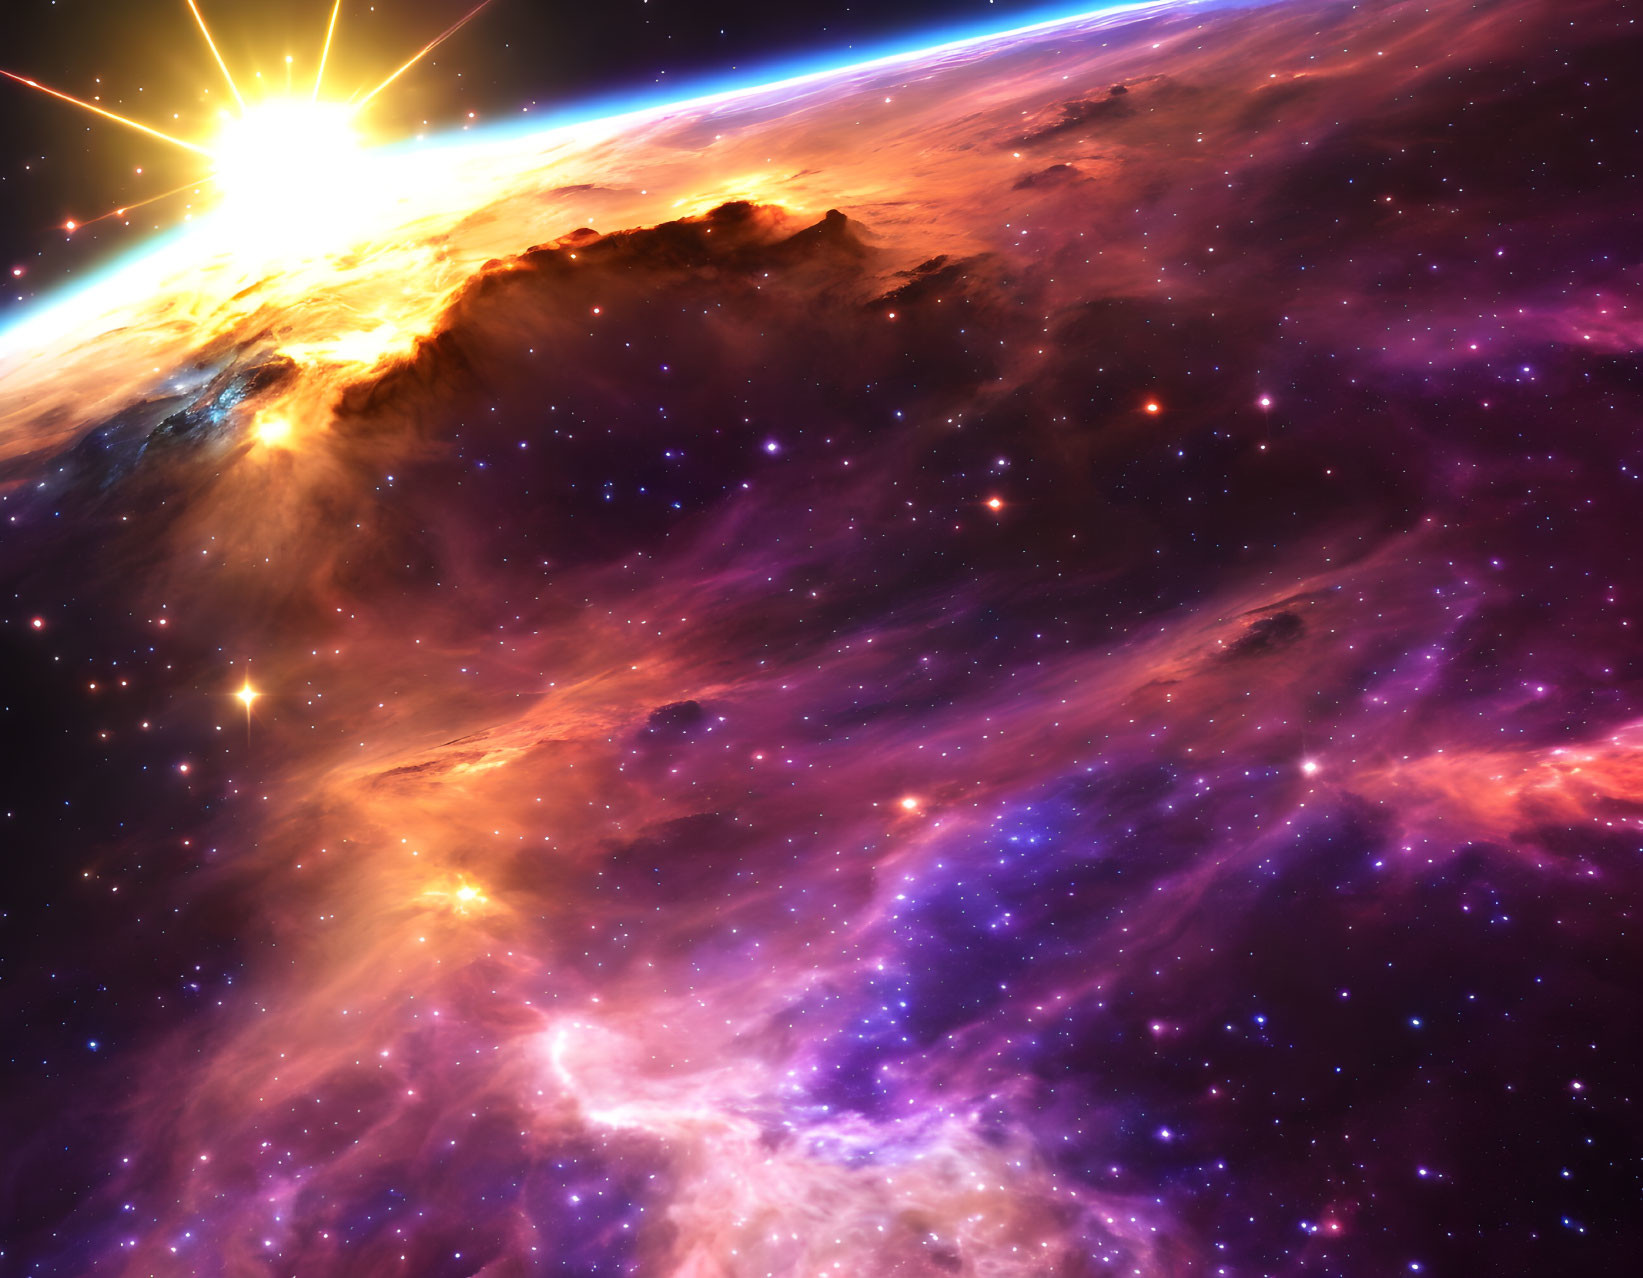 Vibrant space scene with blazing sun and colorful nebula clouds